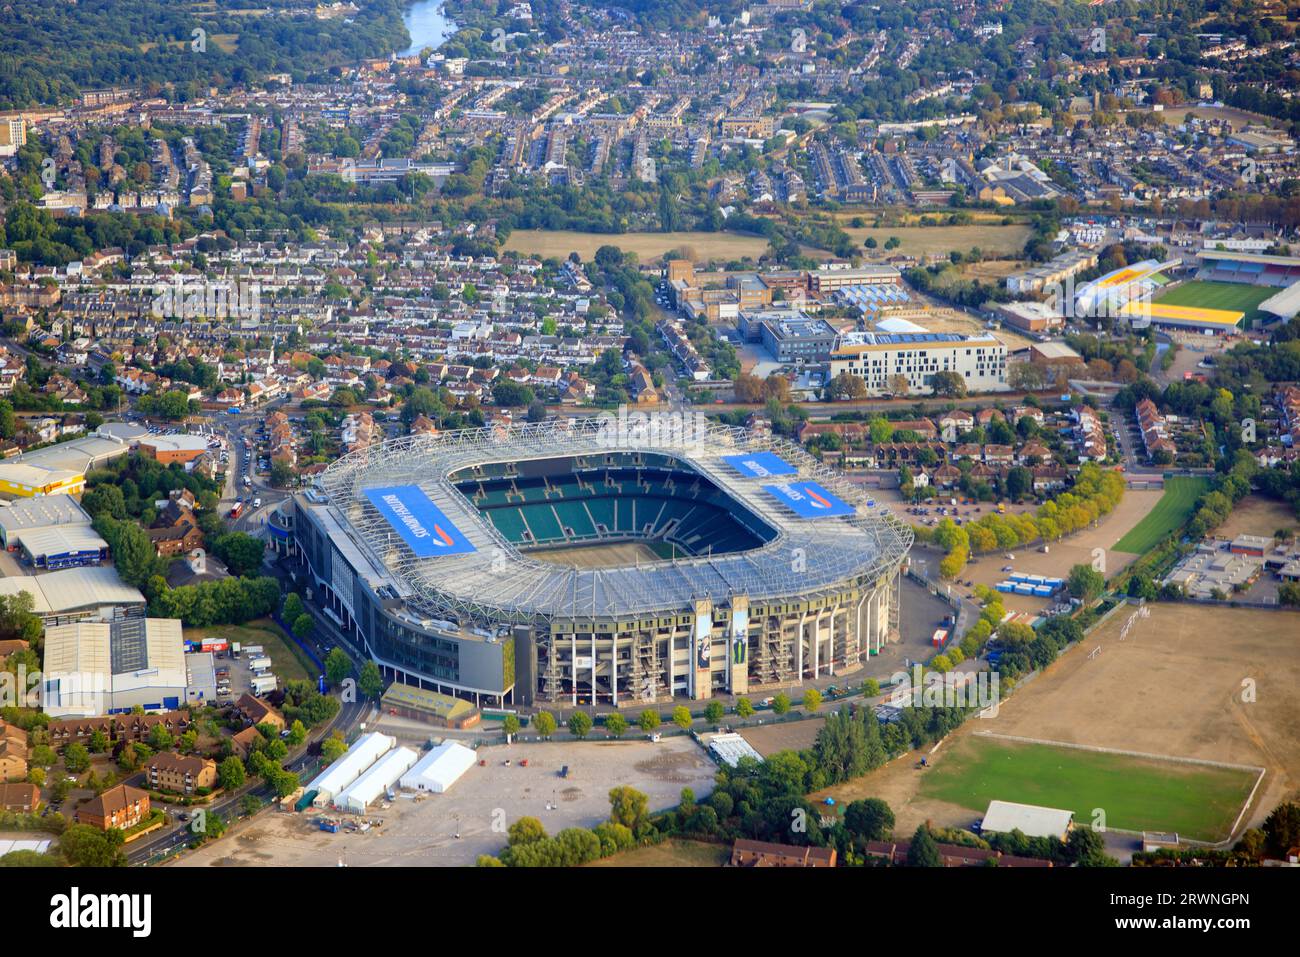 Twickenham Stadium in Twickenham, south-west London, is a rugby union stadium owned by the Rugby Football Union (RFU). The England national rugby unio Stock Photo